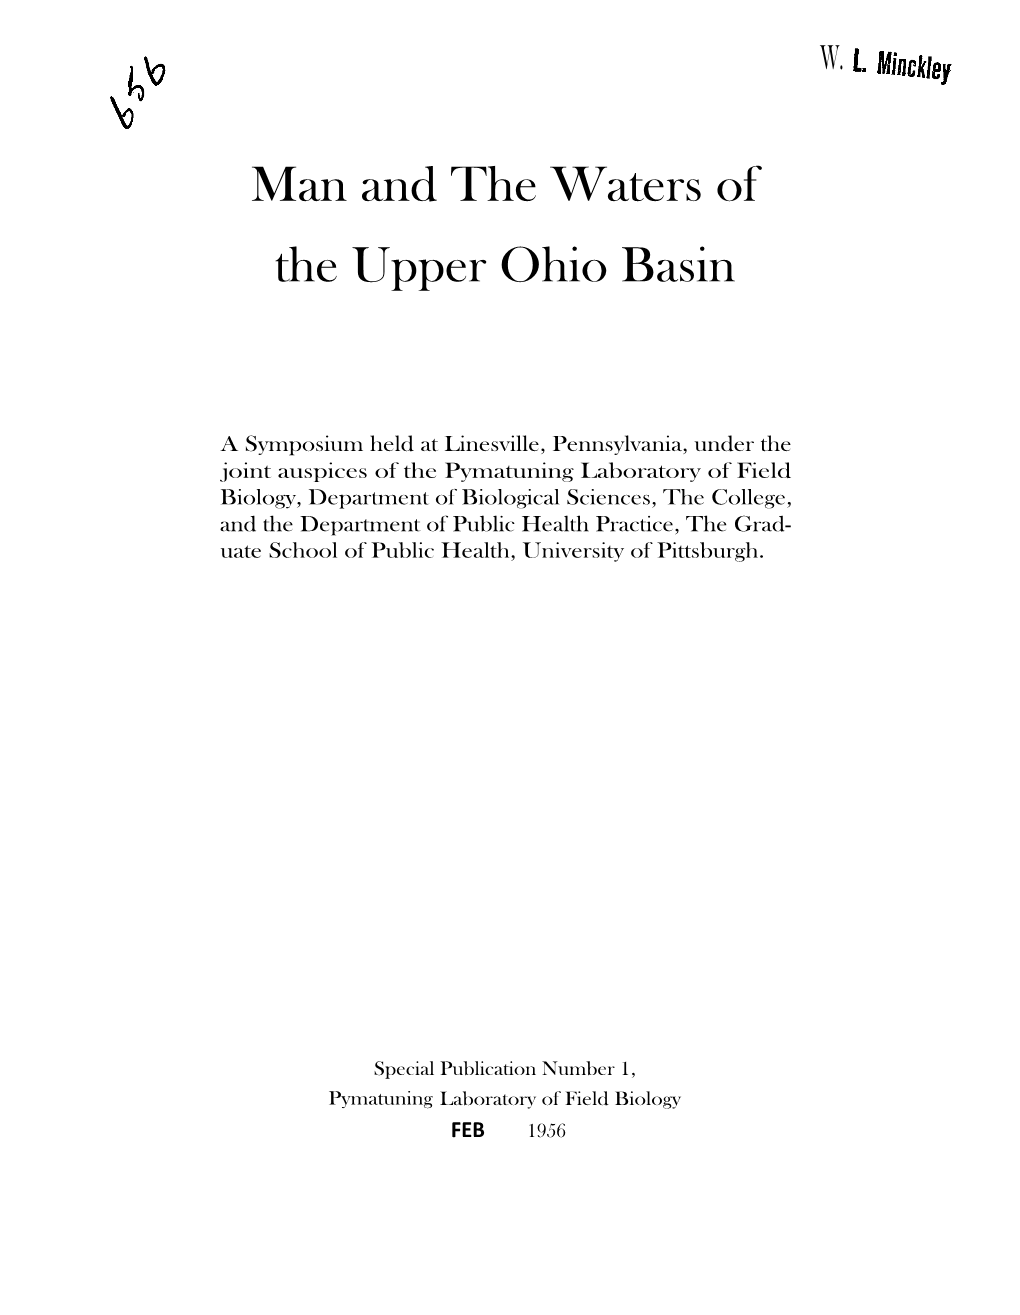 Man and the Waters of the Upper Ohio Basin